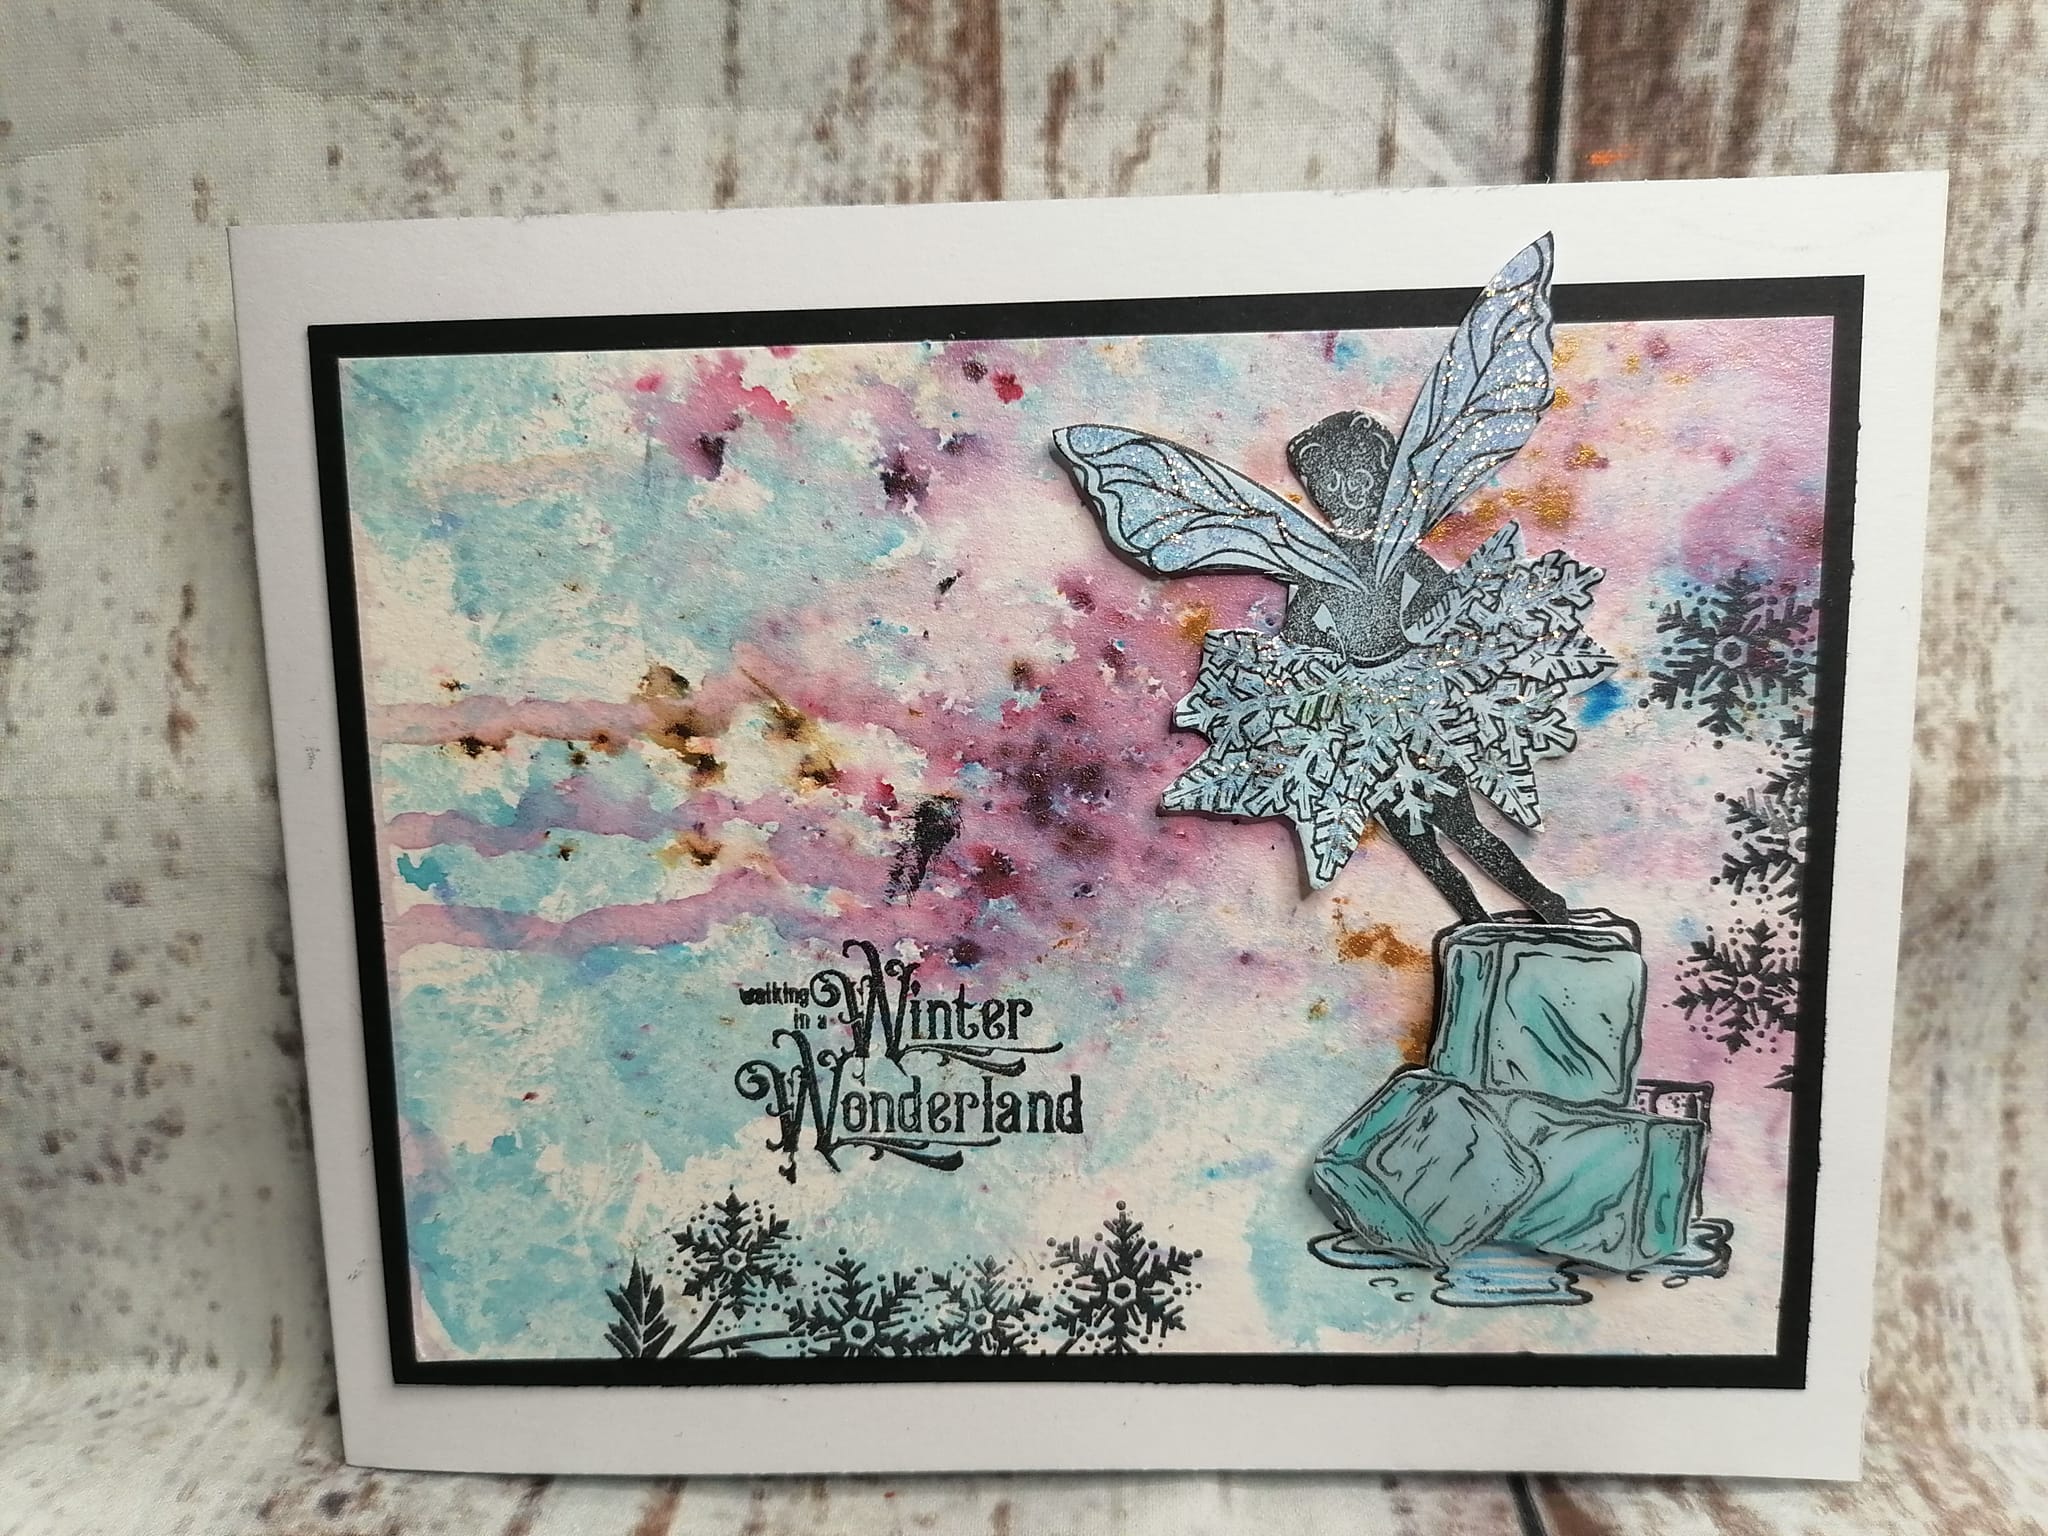 Fairy Hugs Stamps - Crystal